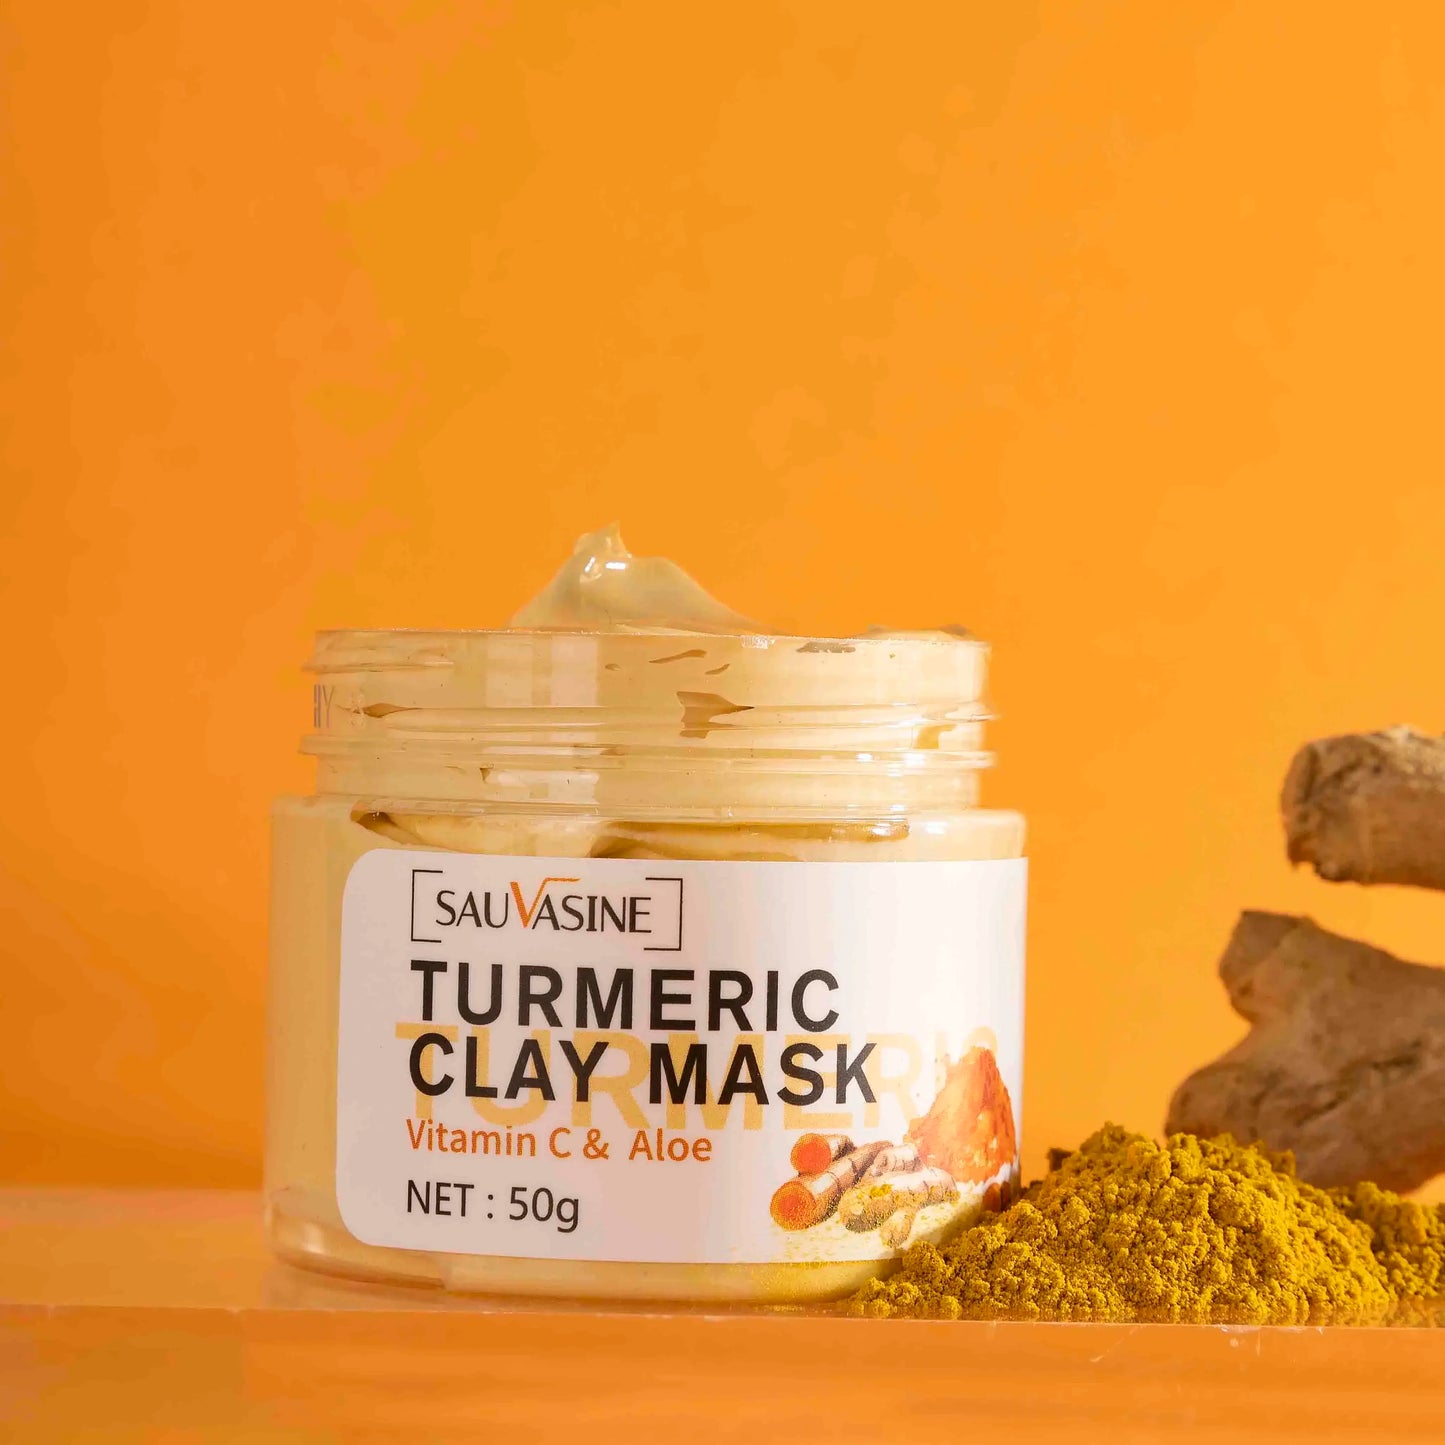 Turmeric Vitamin C Face Mask Acne Dark Spots Removal Exfoliating Oil Control Deep Cleansing Clay Mask Glowing Skin Care Product